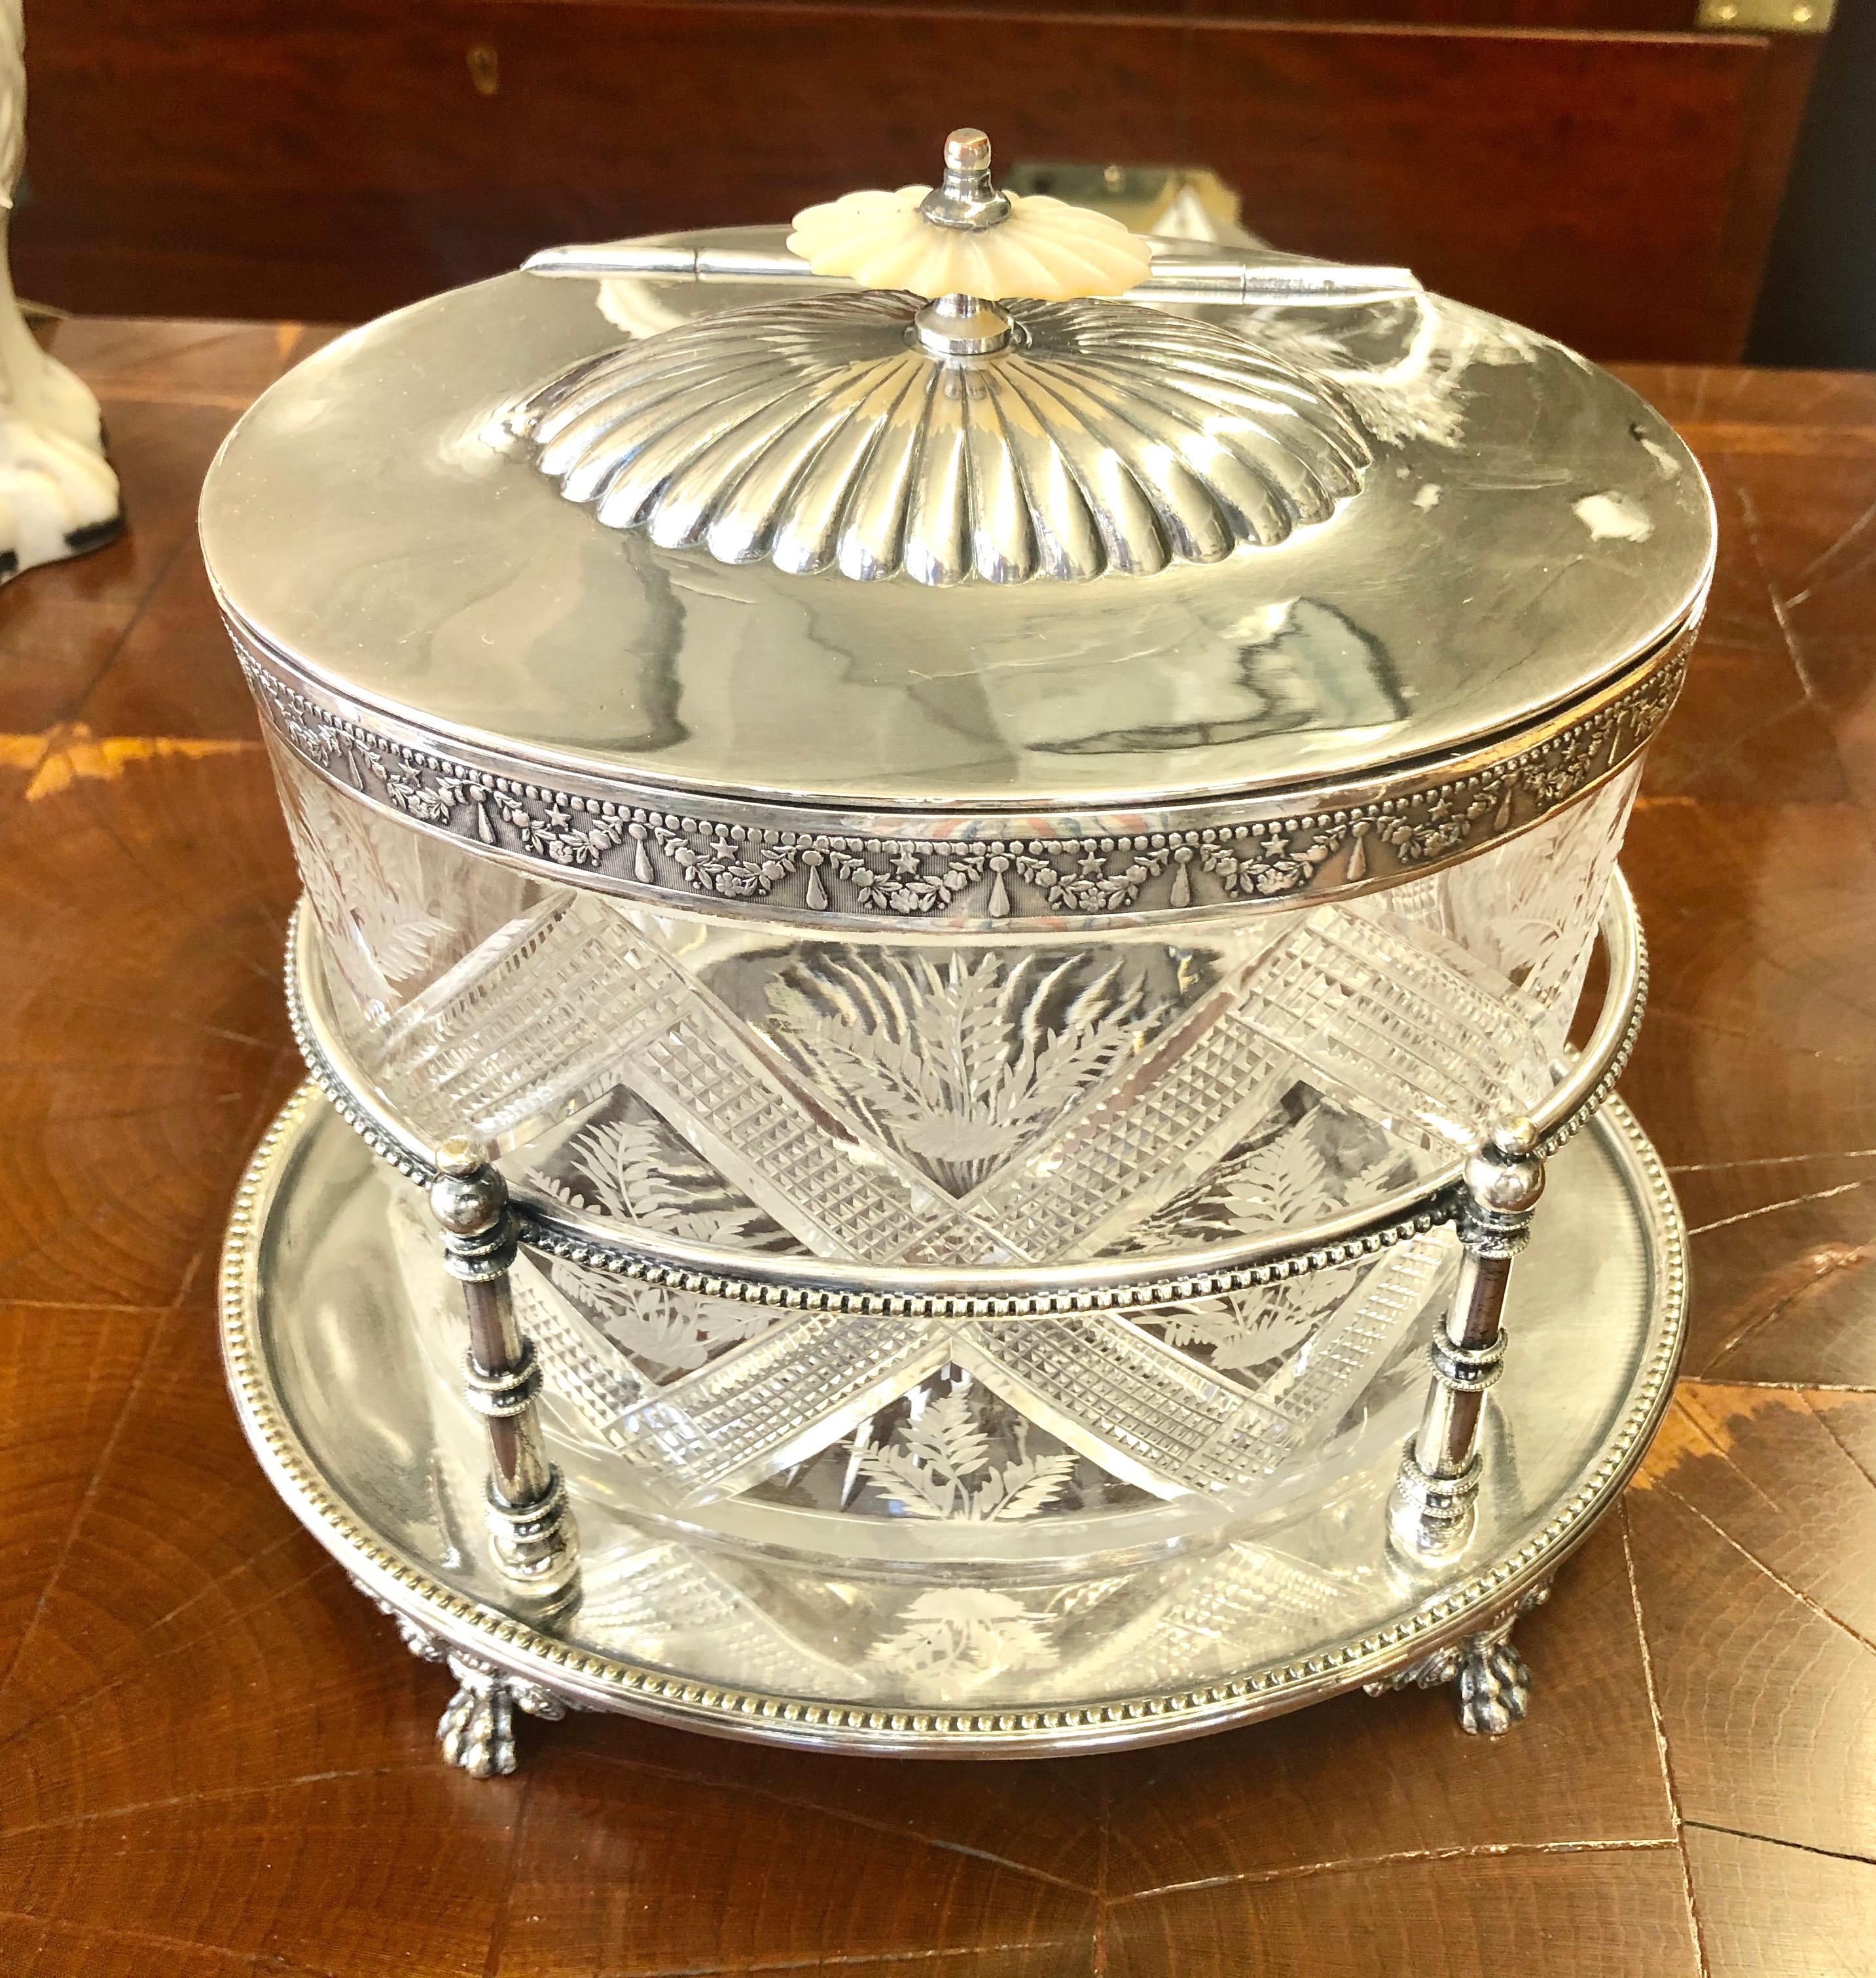 Finest quality handcut crystal and Sheffield silver plated oval biscuit box on stand with mother of pearl finial and 